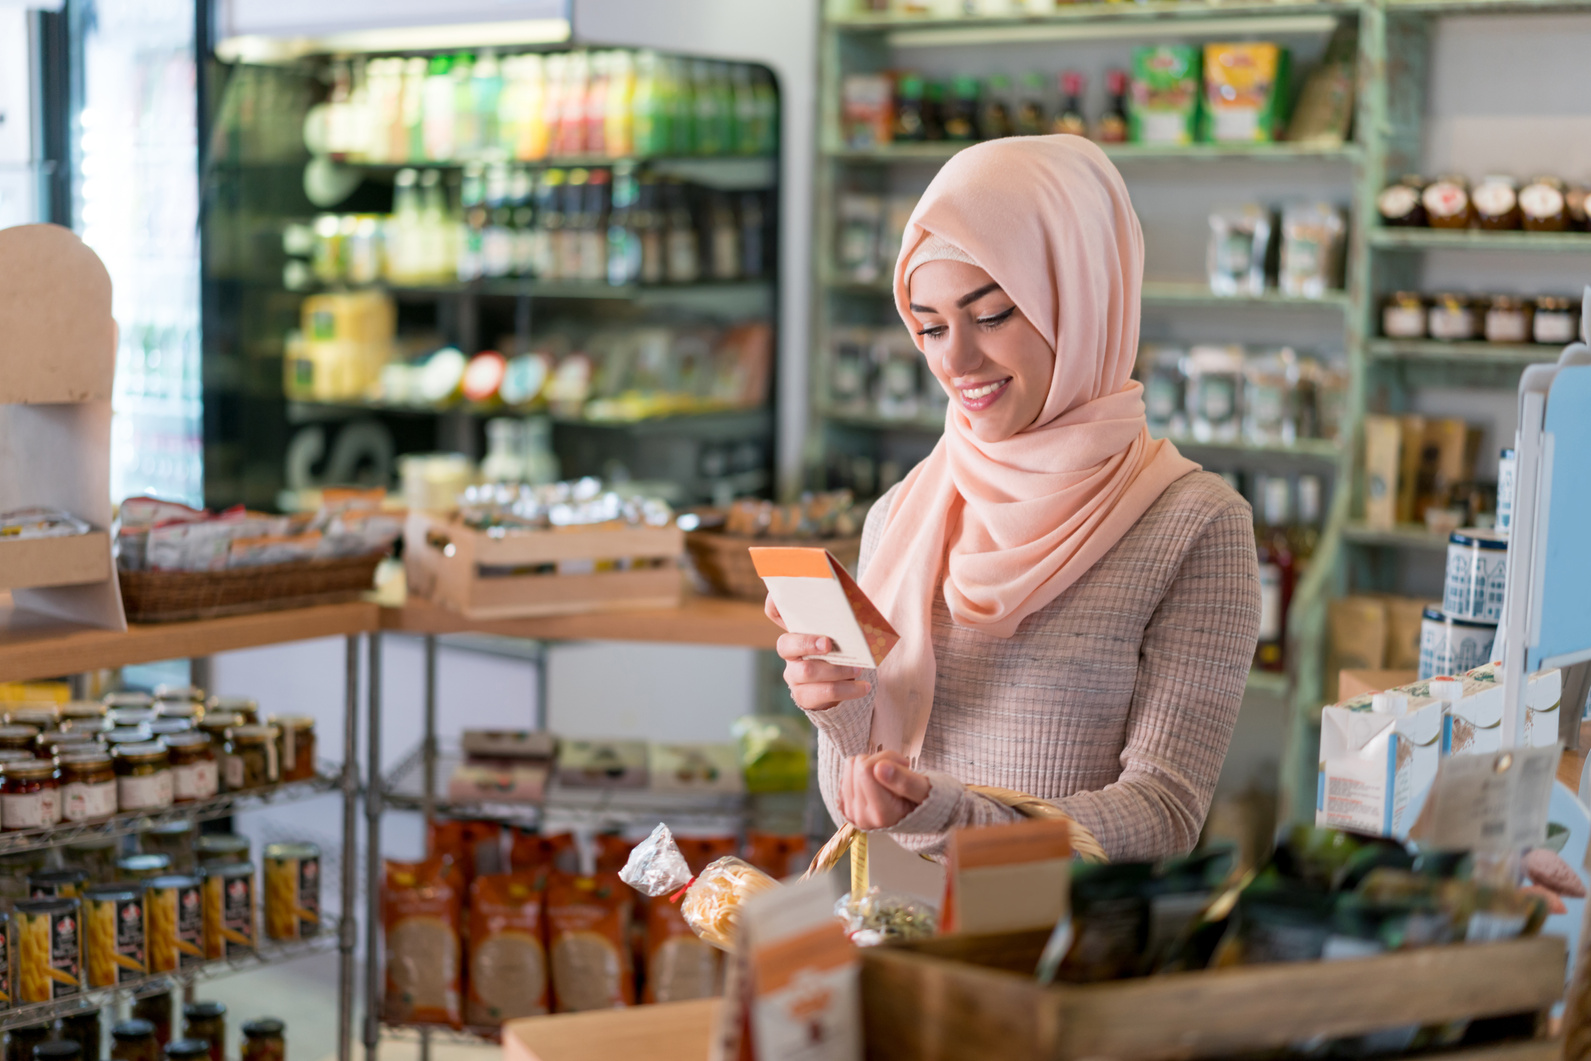 Muslim woman shopping at the grocery shop